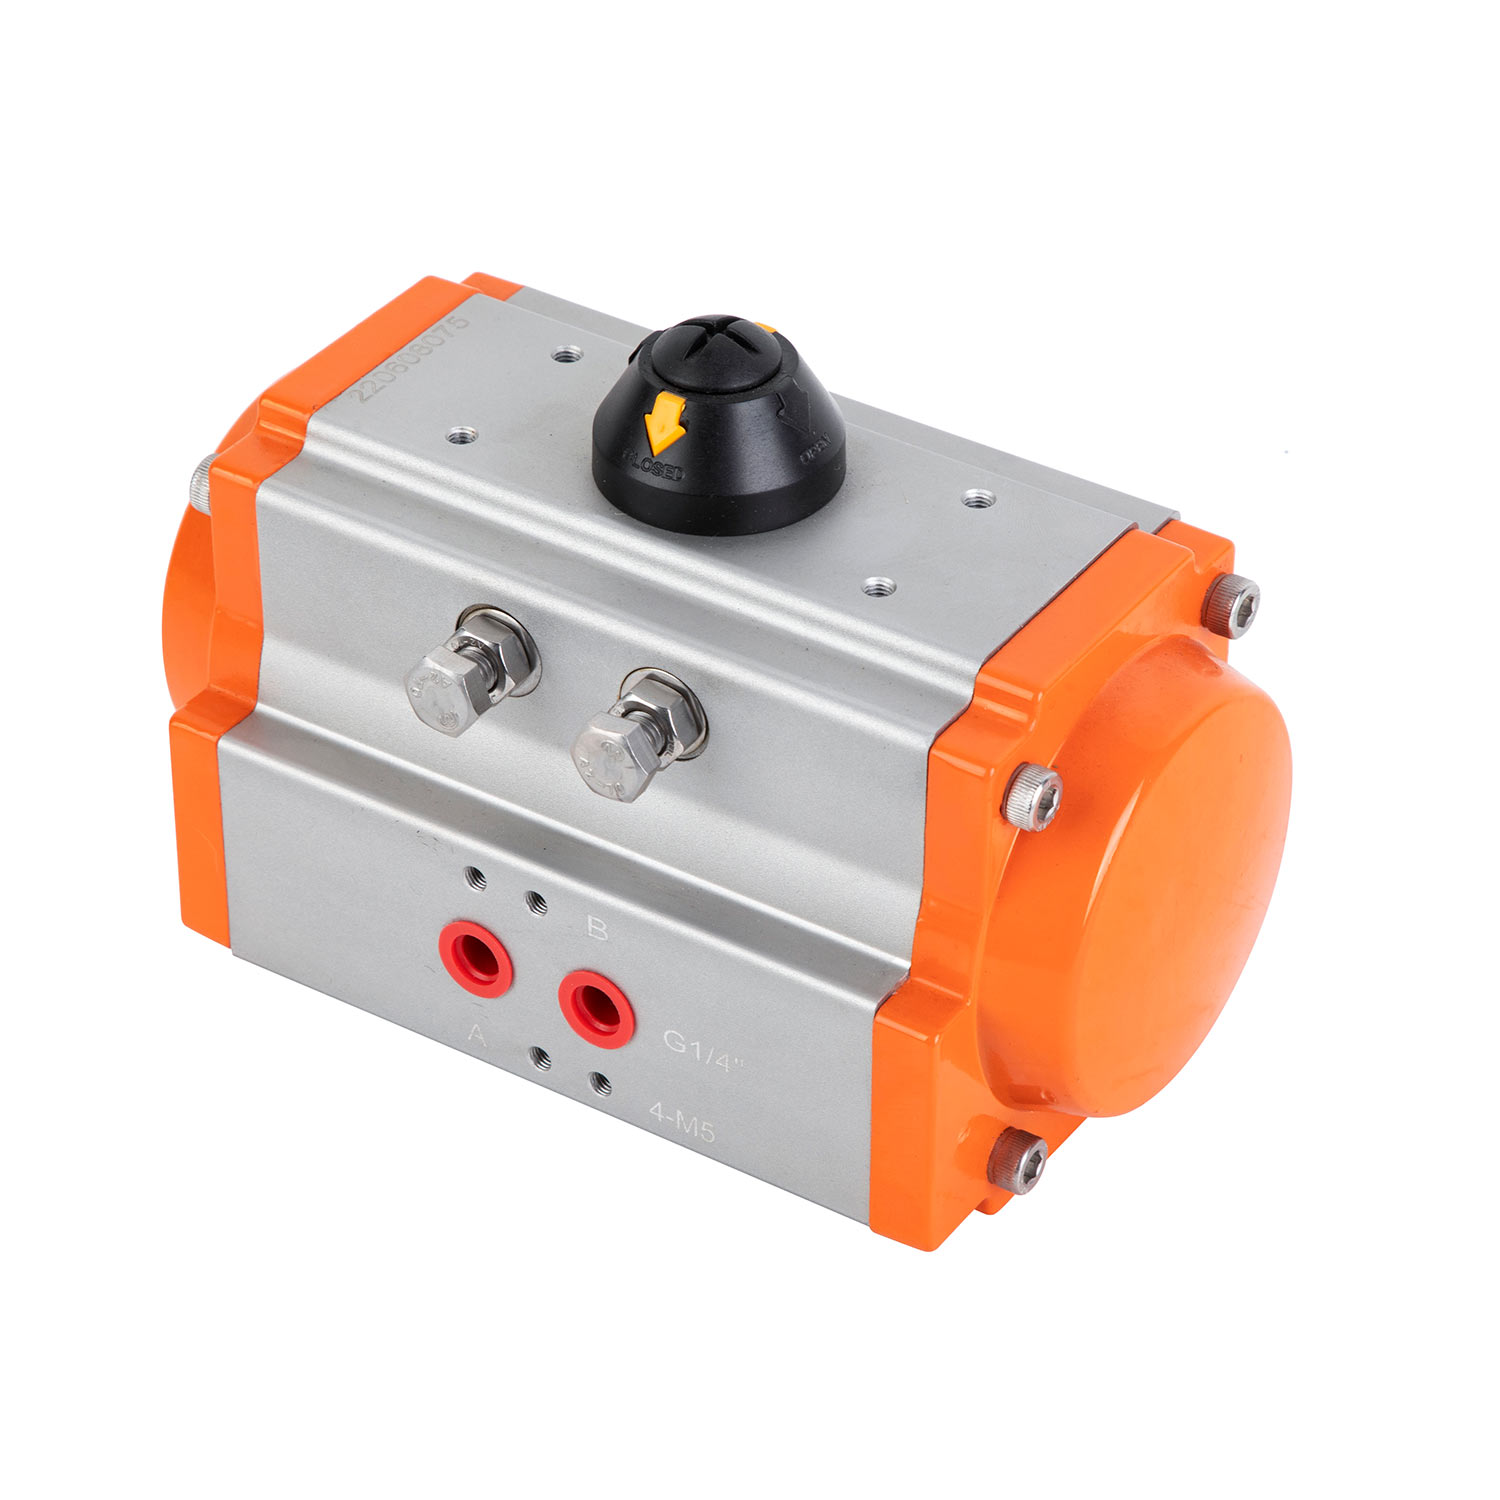 Double Acting Valve Actuator Redefining Precision And Control In Industrial Automation (1)qux